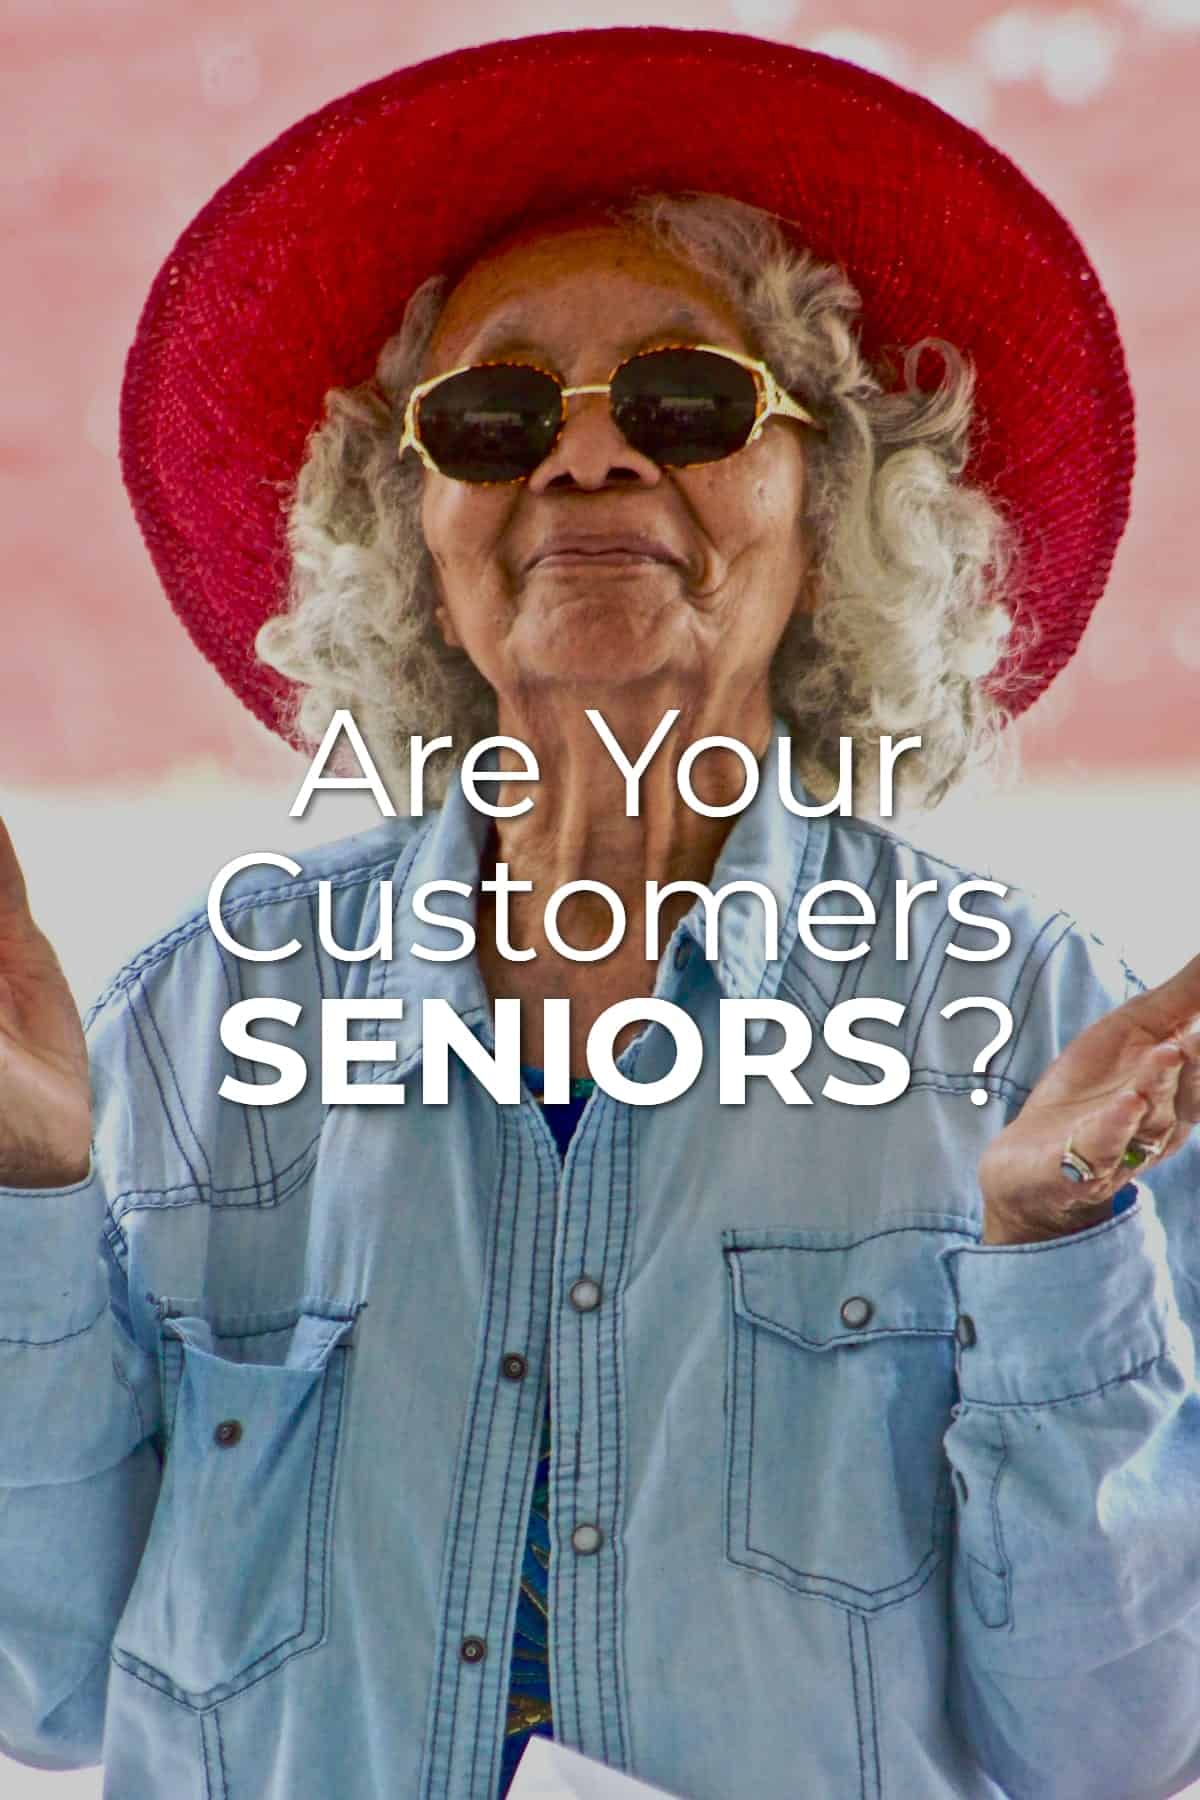 If your customers are seniors or over 65, you might take a look at the world through their eyes to find out what they need and want. via @scopedesign